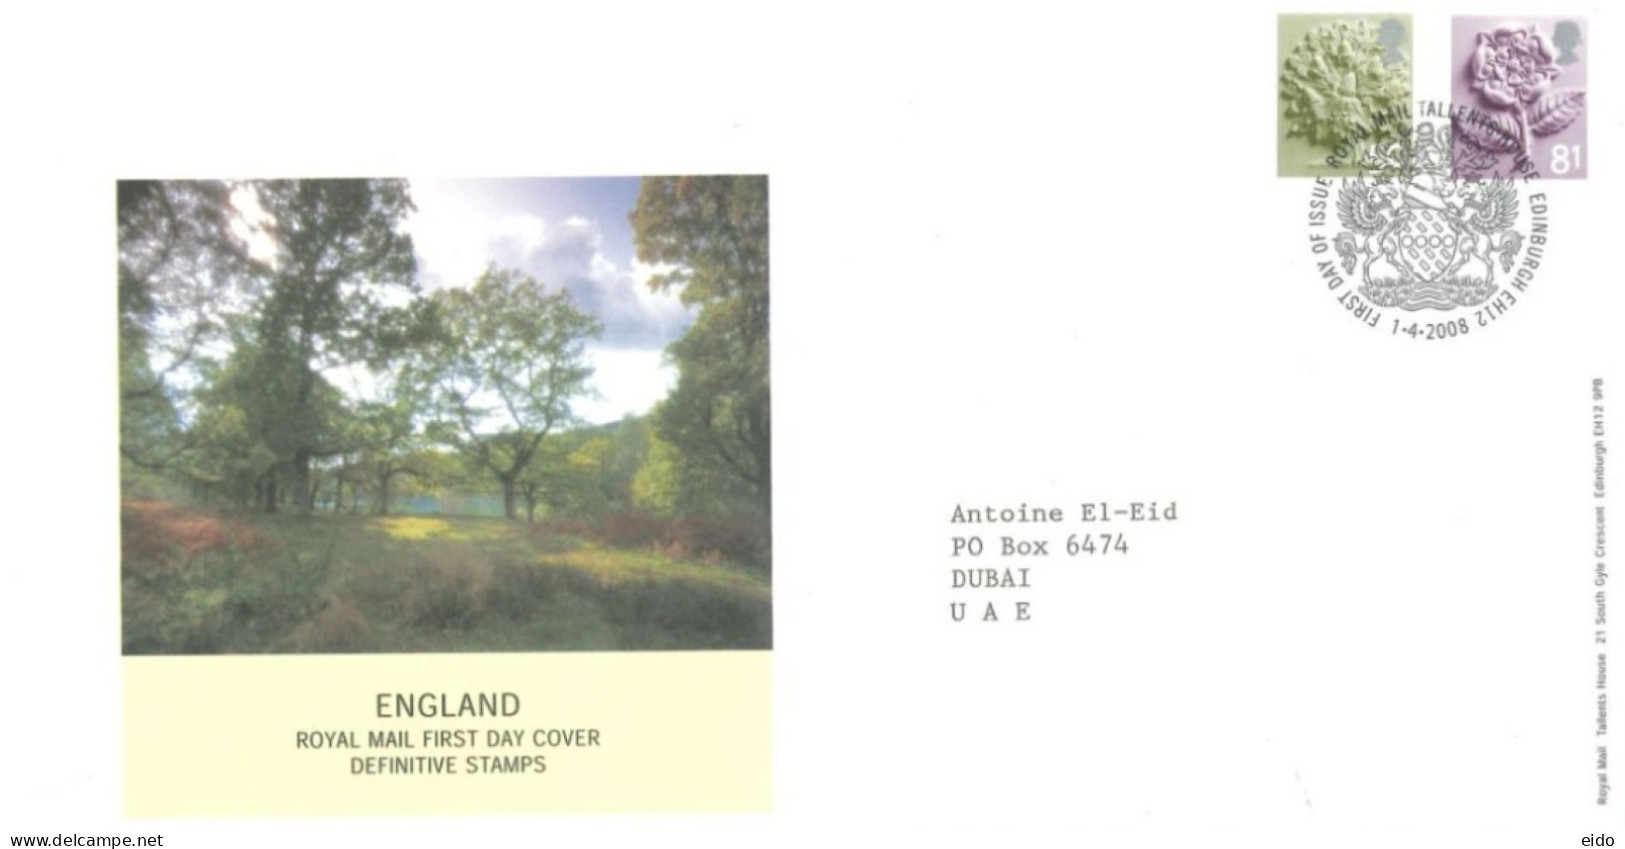 GREAT BRITAIN - 2008, FDC OF ENGLAND ROYAL MAIL DEFINITIVE STAMPS. - Storia Postale